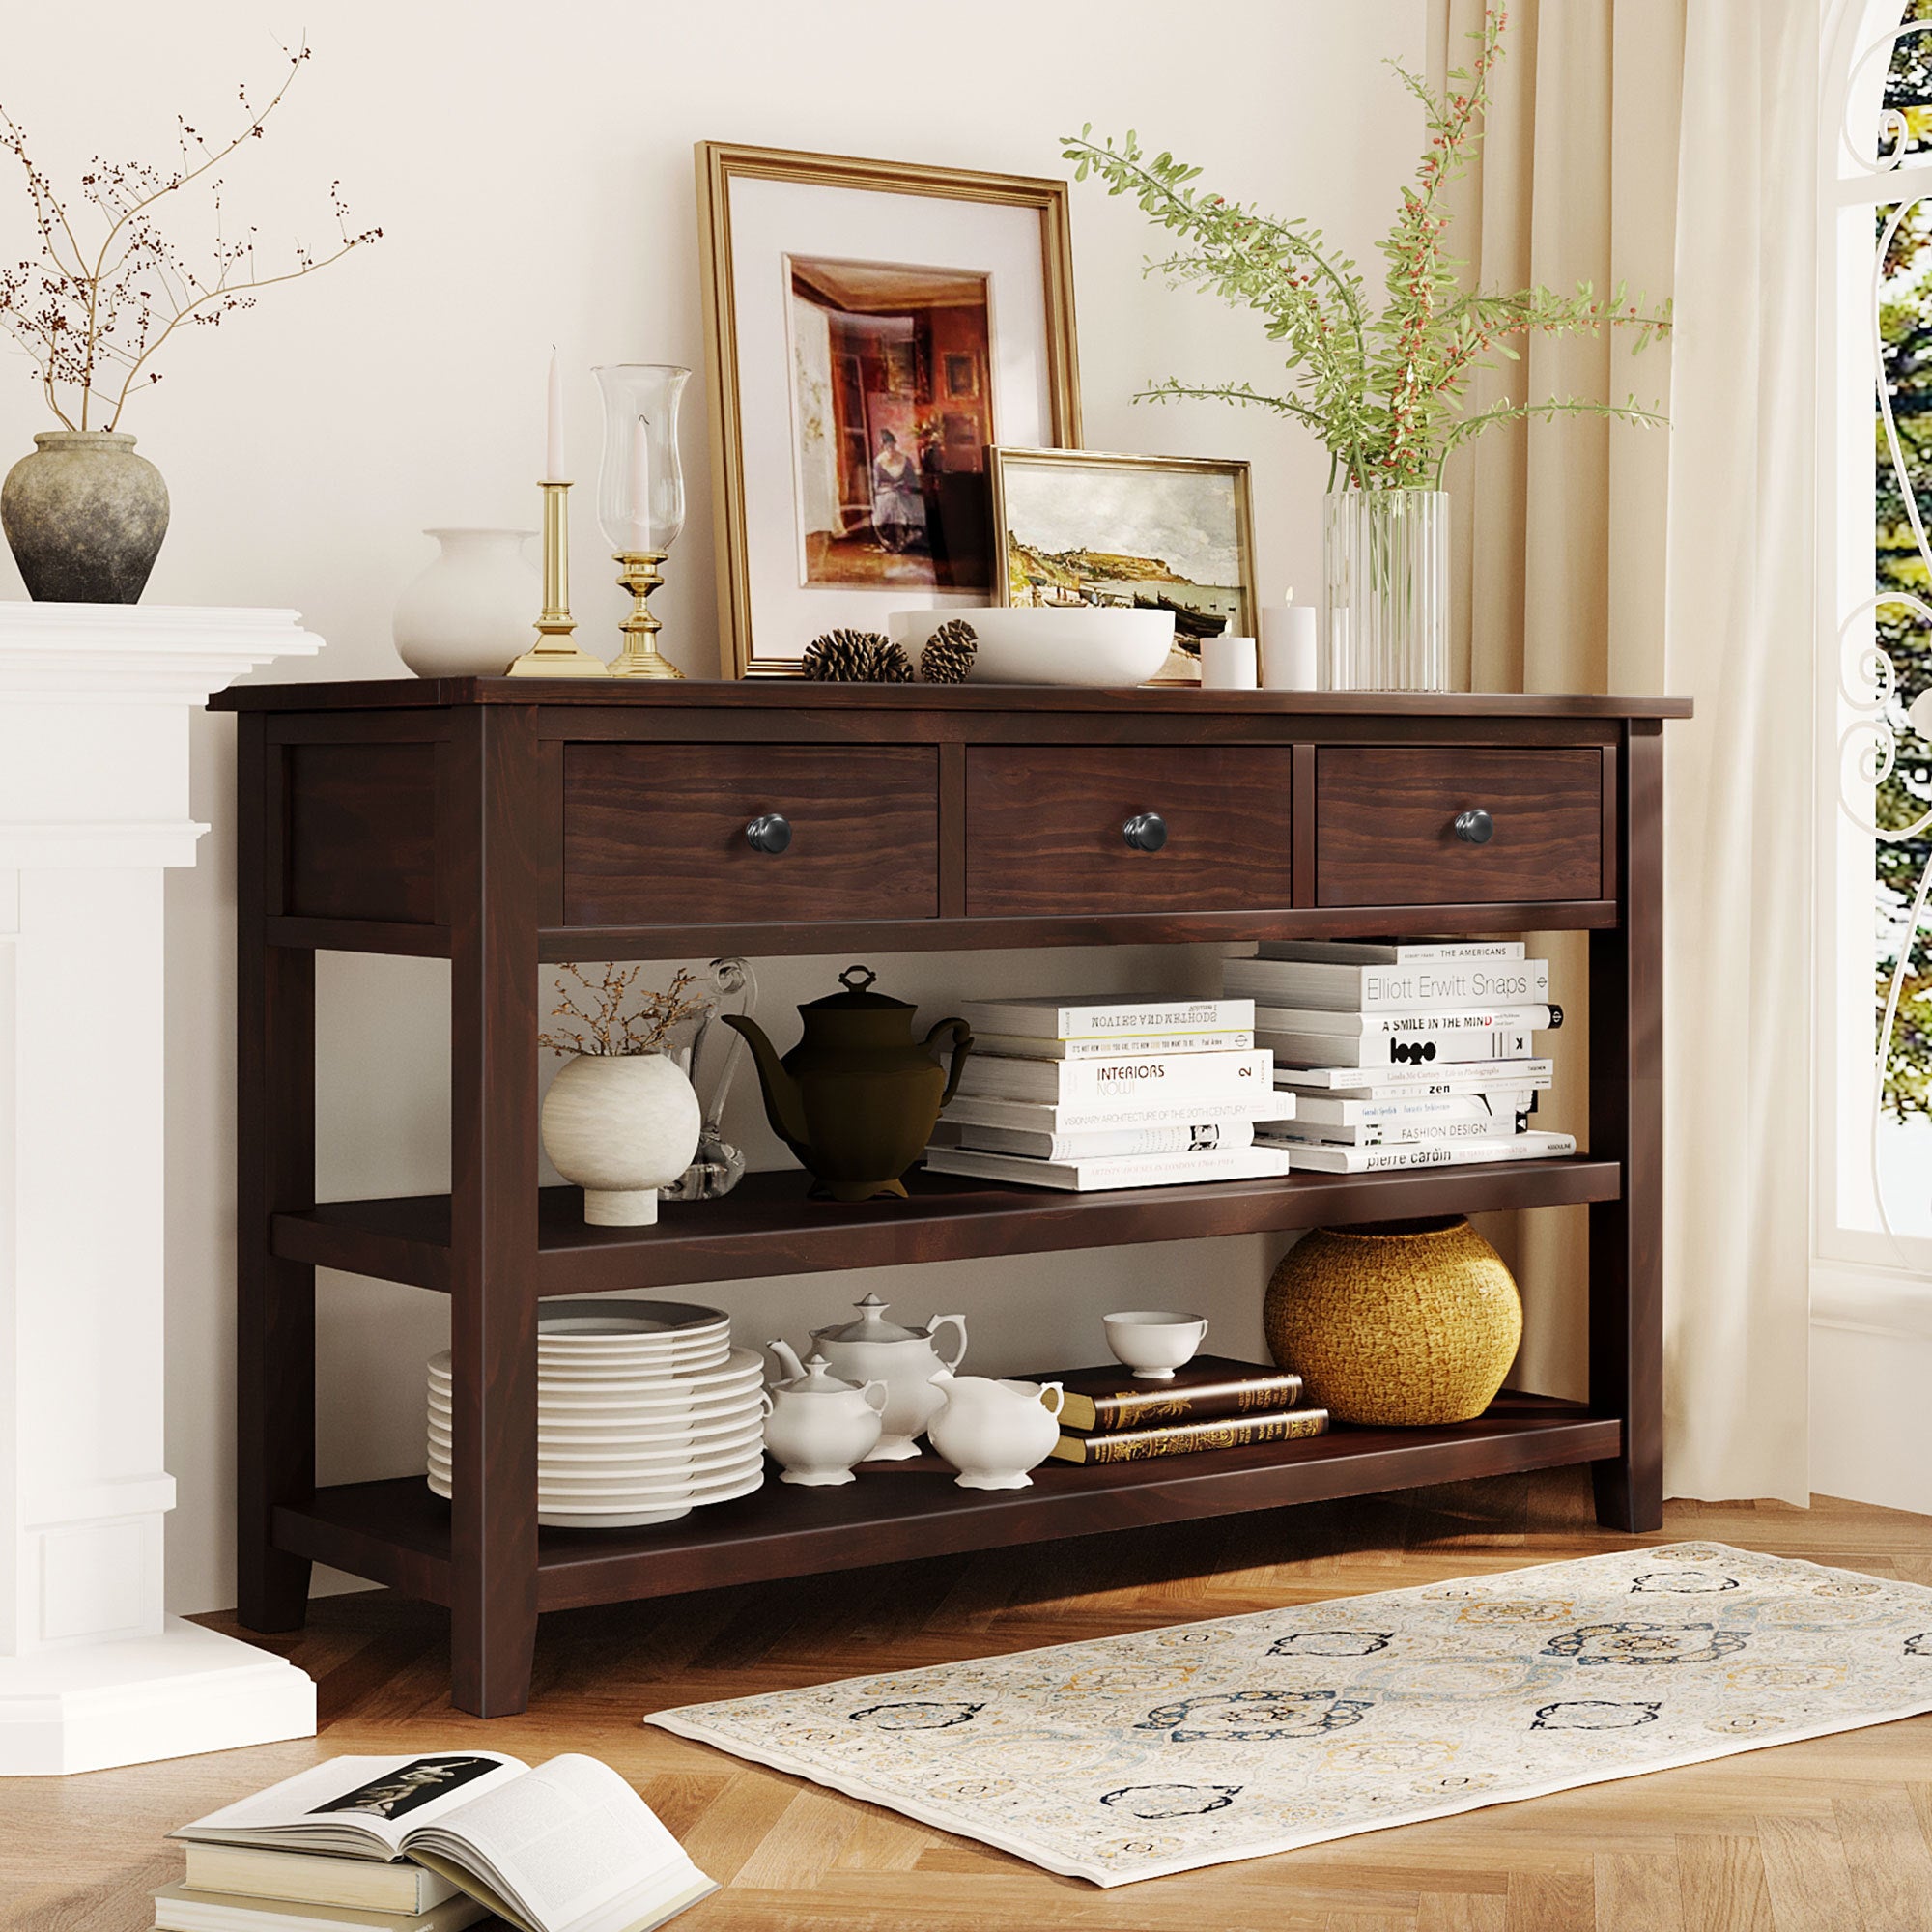 Retro Design Console Table with Two Open Shelves